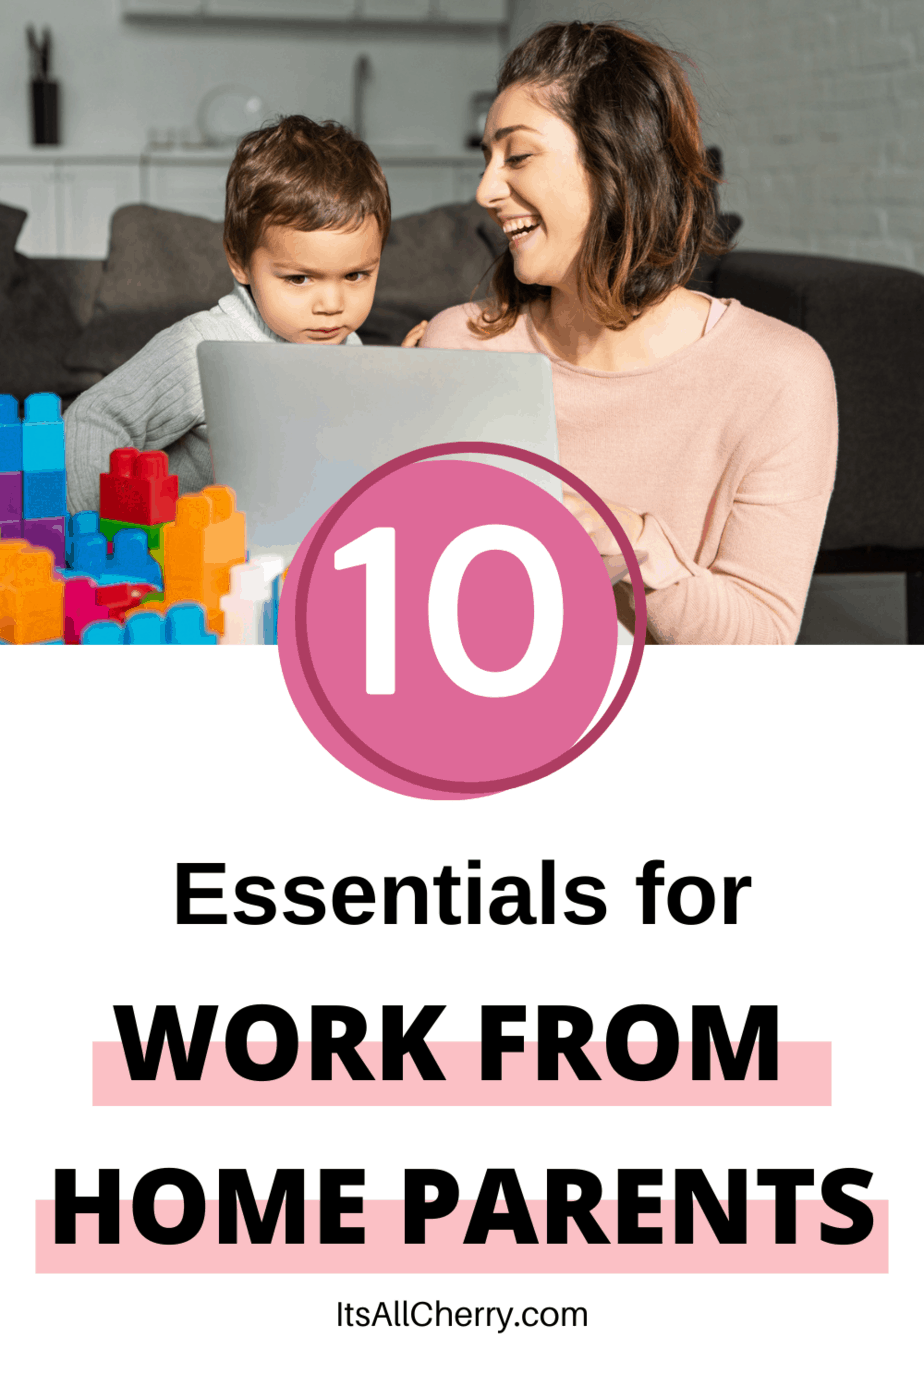 https://itsallcherry.com/wp-content/uploads/2020/09/essentials-for-work-from-home-parents.png